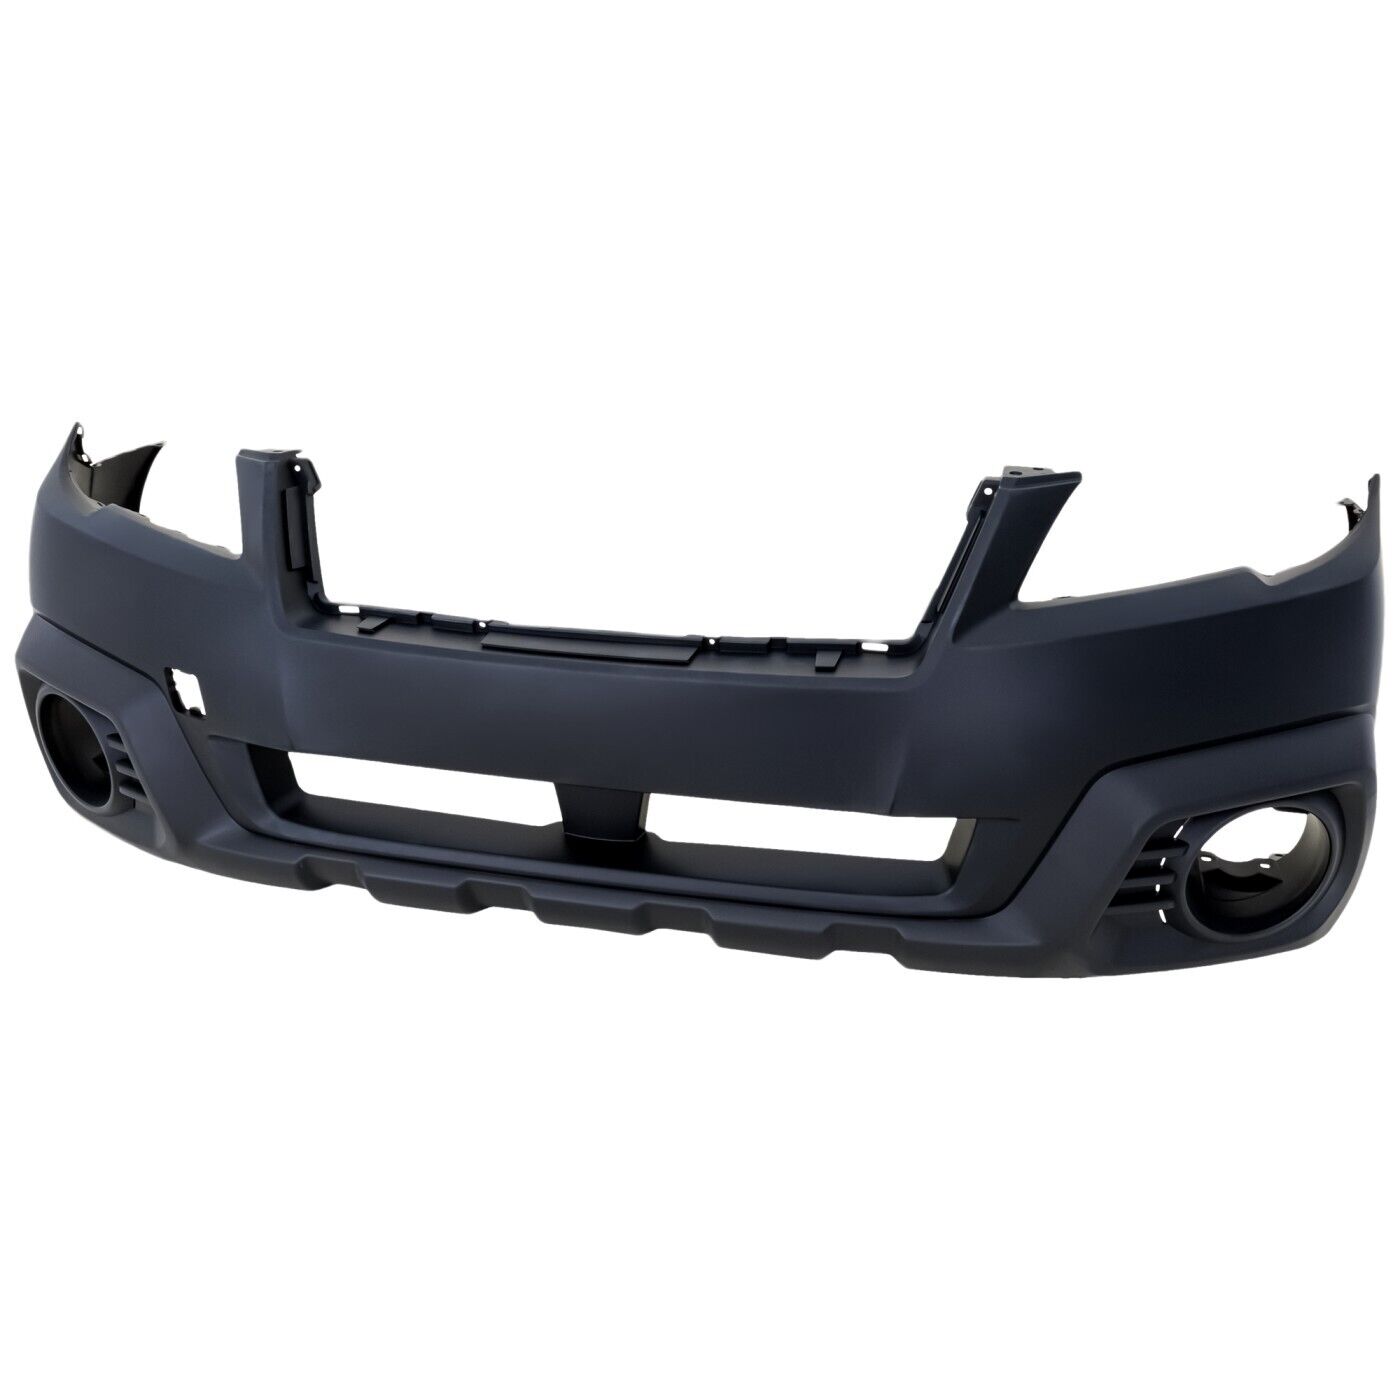 Front Bumper Cover For 2013-2014 Subaru Outback w/ fog lamp holes Primed top